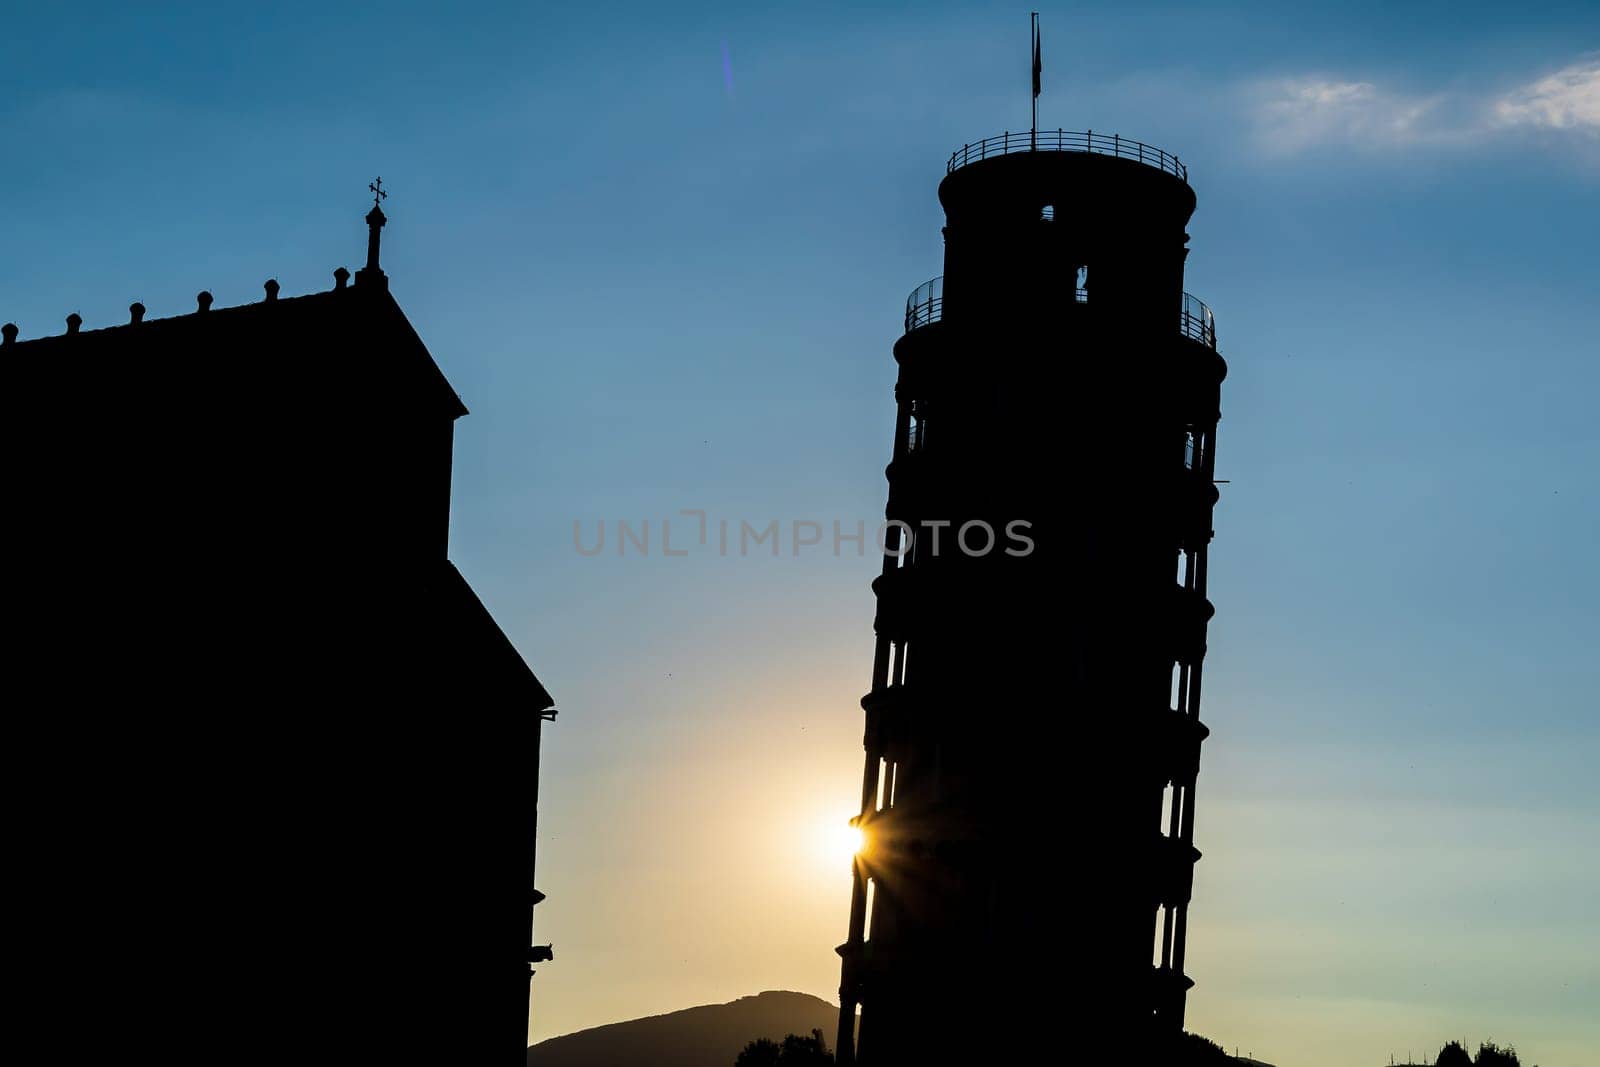 Silhouette shot of The famous Leaning Tower in Pisa, Italy with beautiful sunrise